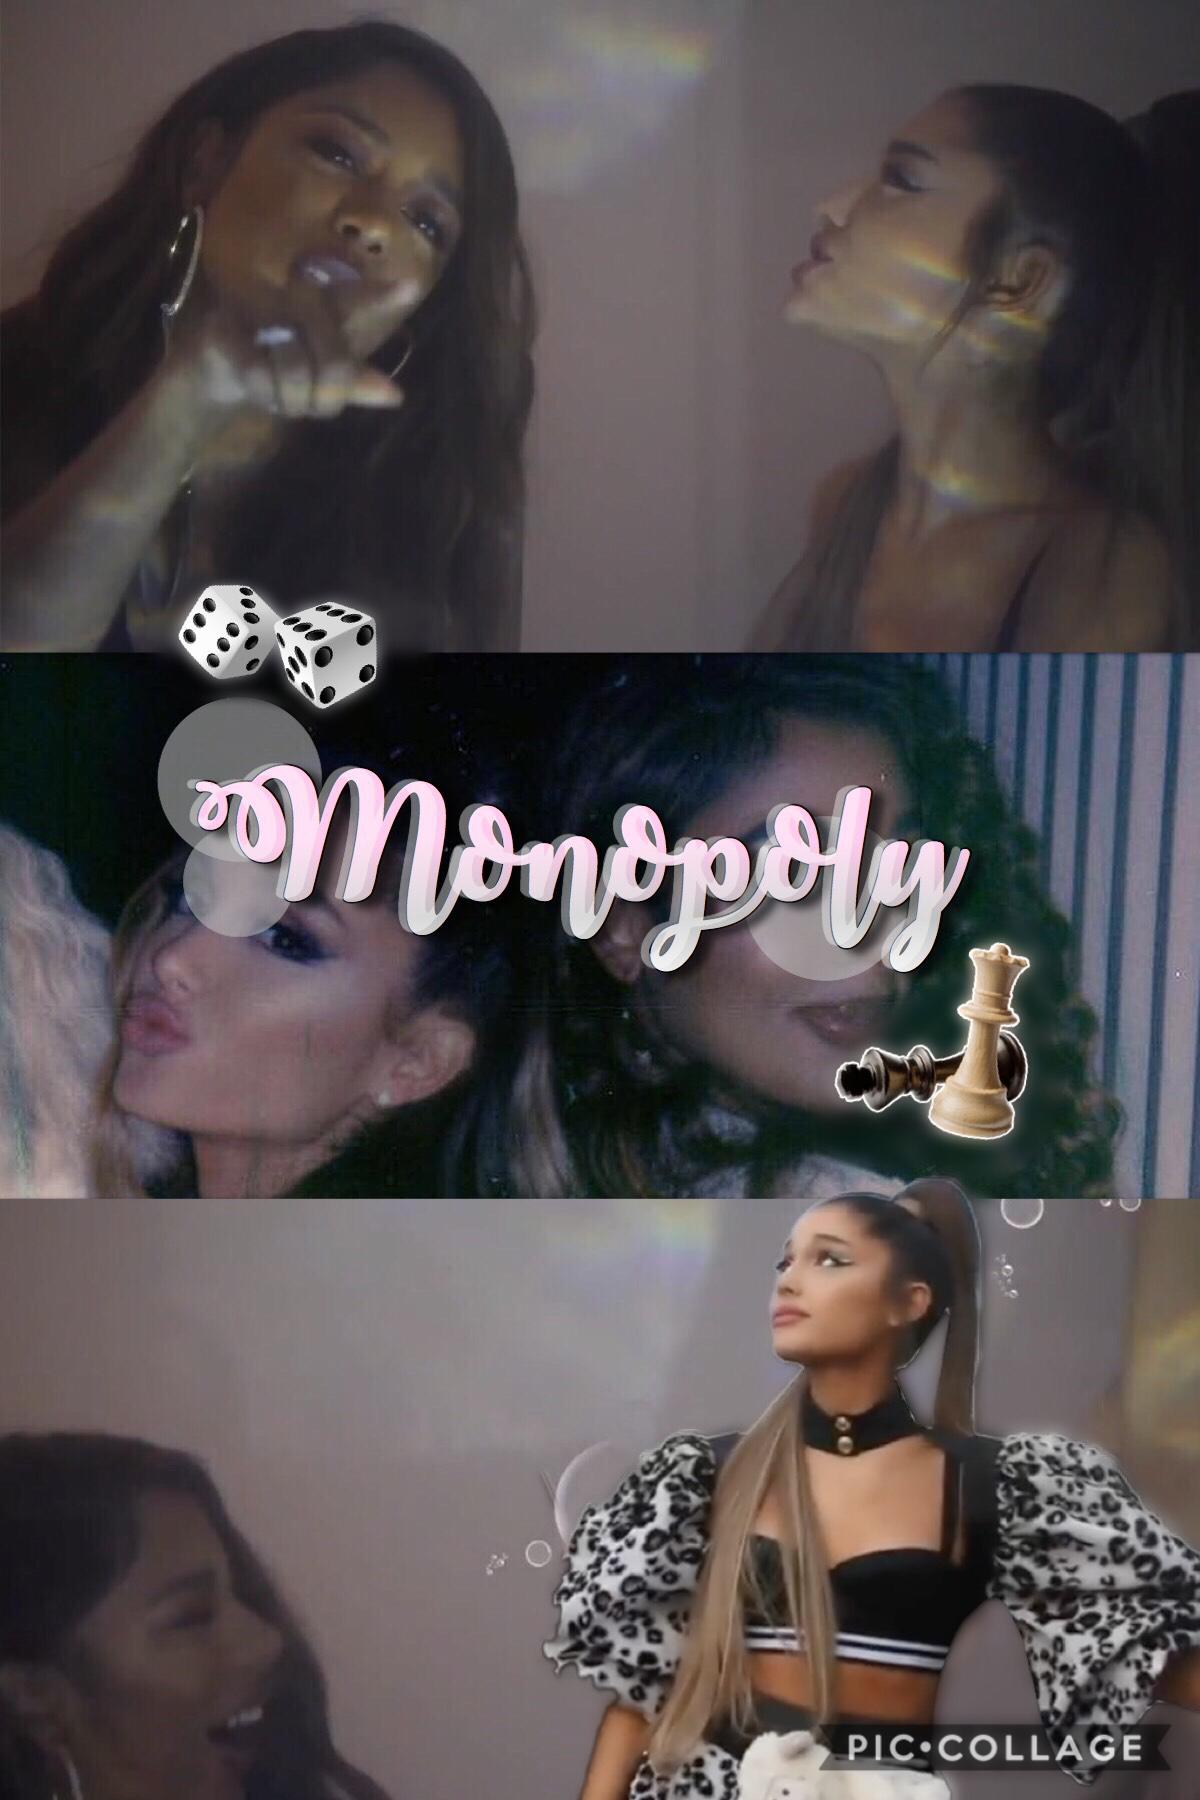 Tap
Have y’all listened to Ariana and Victoria ‘s new song yet?
The music video is so funny haha